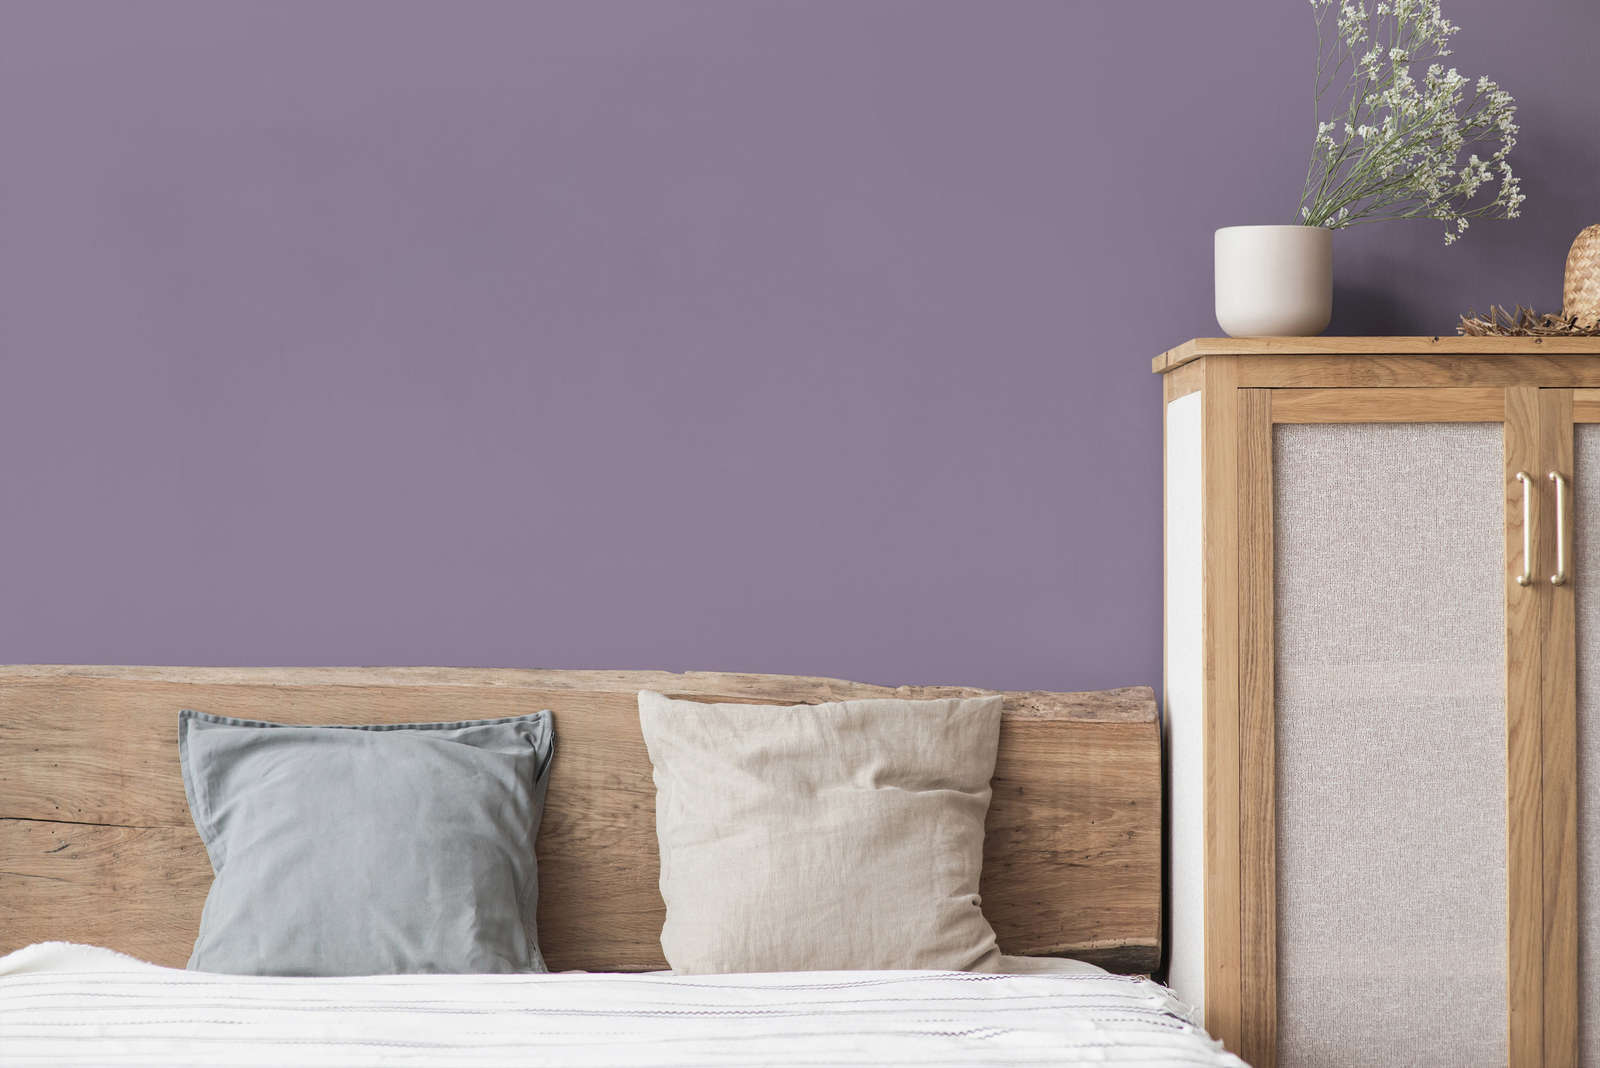             Wall Paint TCK2006 »Artful Aubergine« in strong violet – 5,0 litre
        